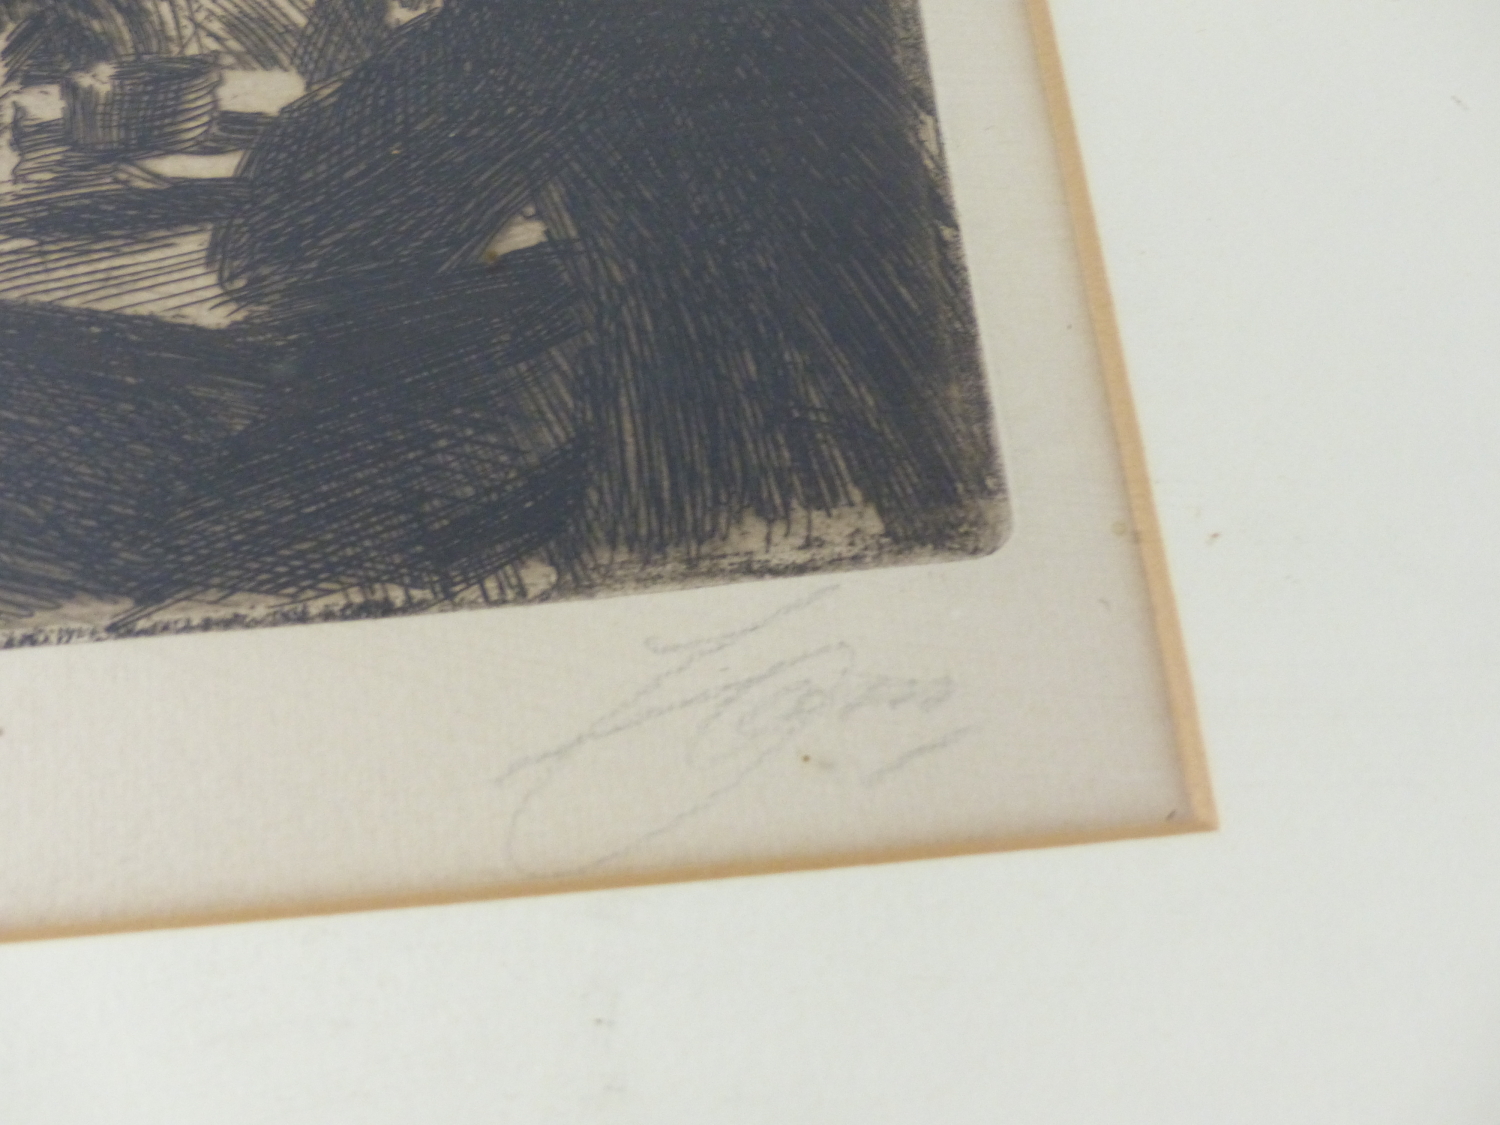 ANDERS ZORN. (1860-1920) AN INTERIOR SCENE, PENCIL SIGNED ETCHING WITH GALLERY LABEL VERSO. 11.5 x - Image 2 of 5